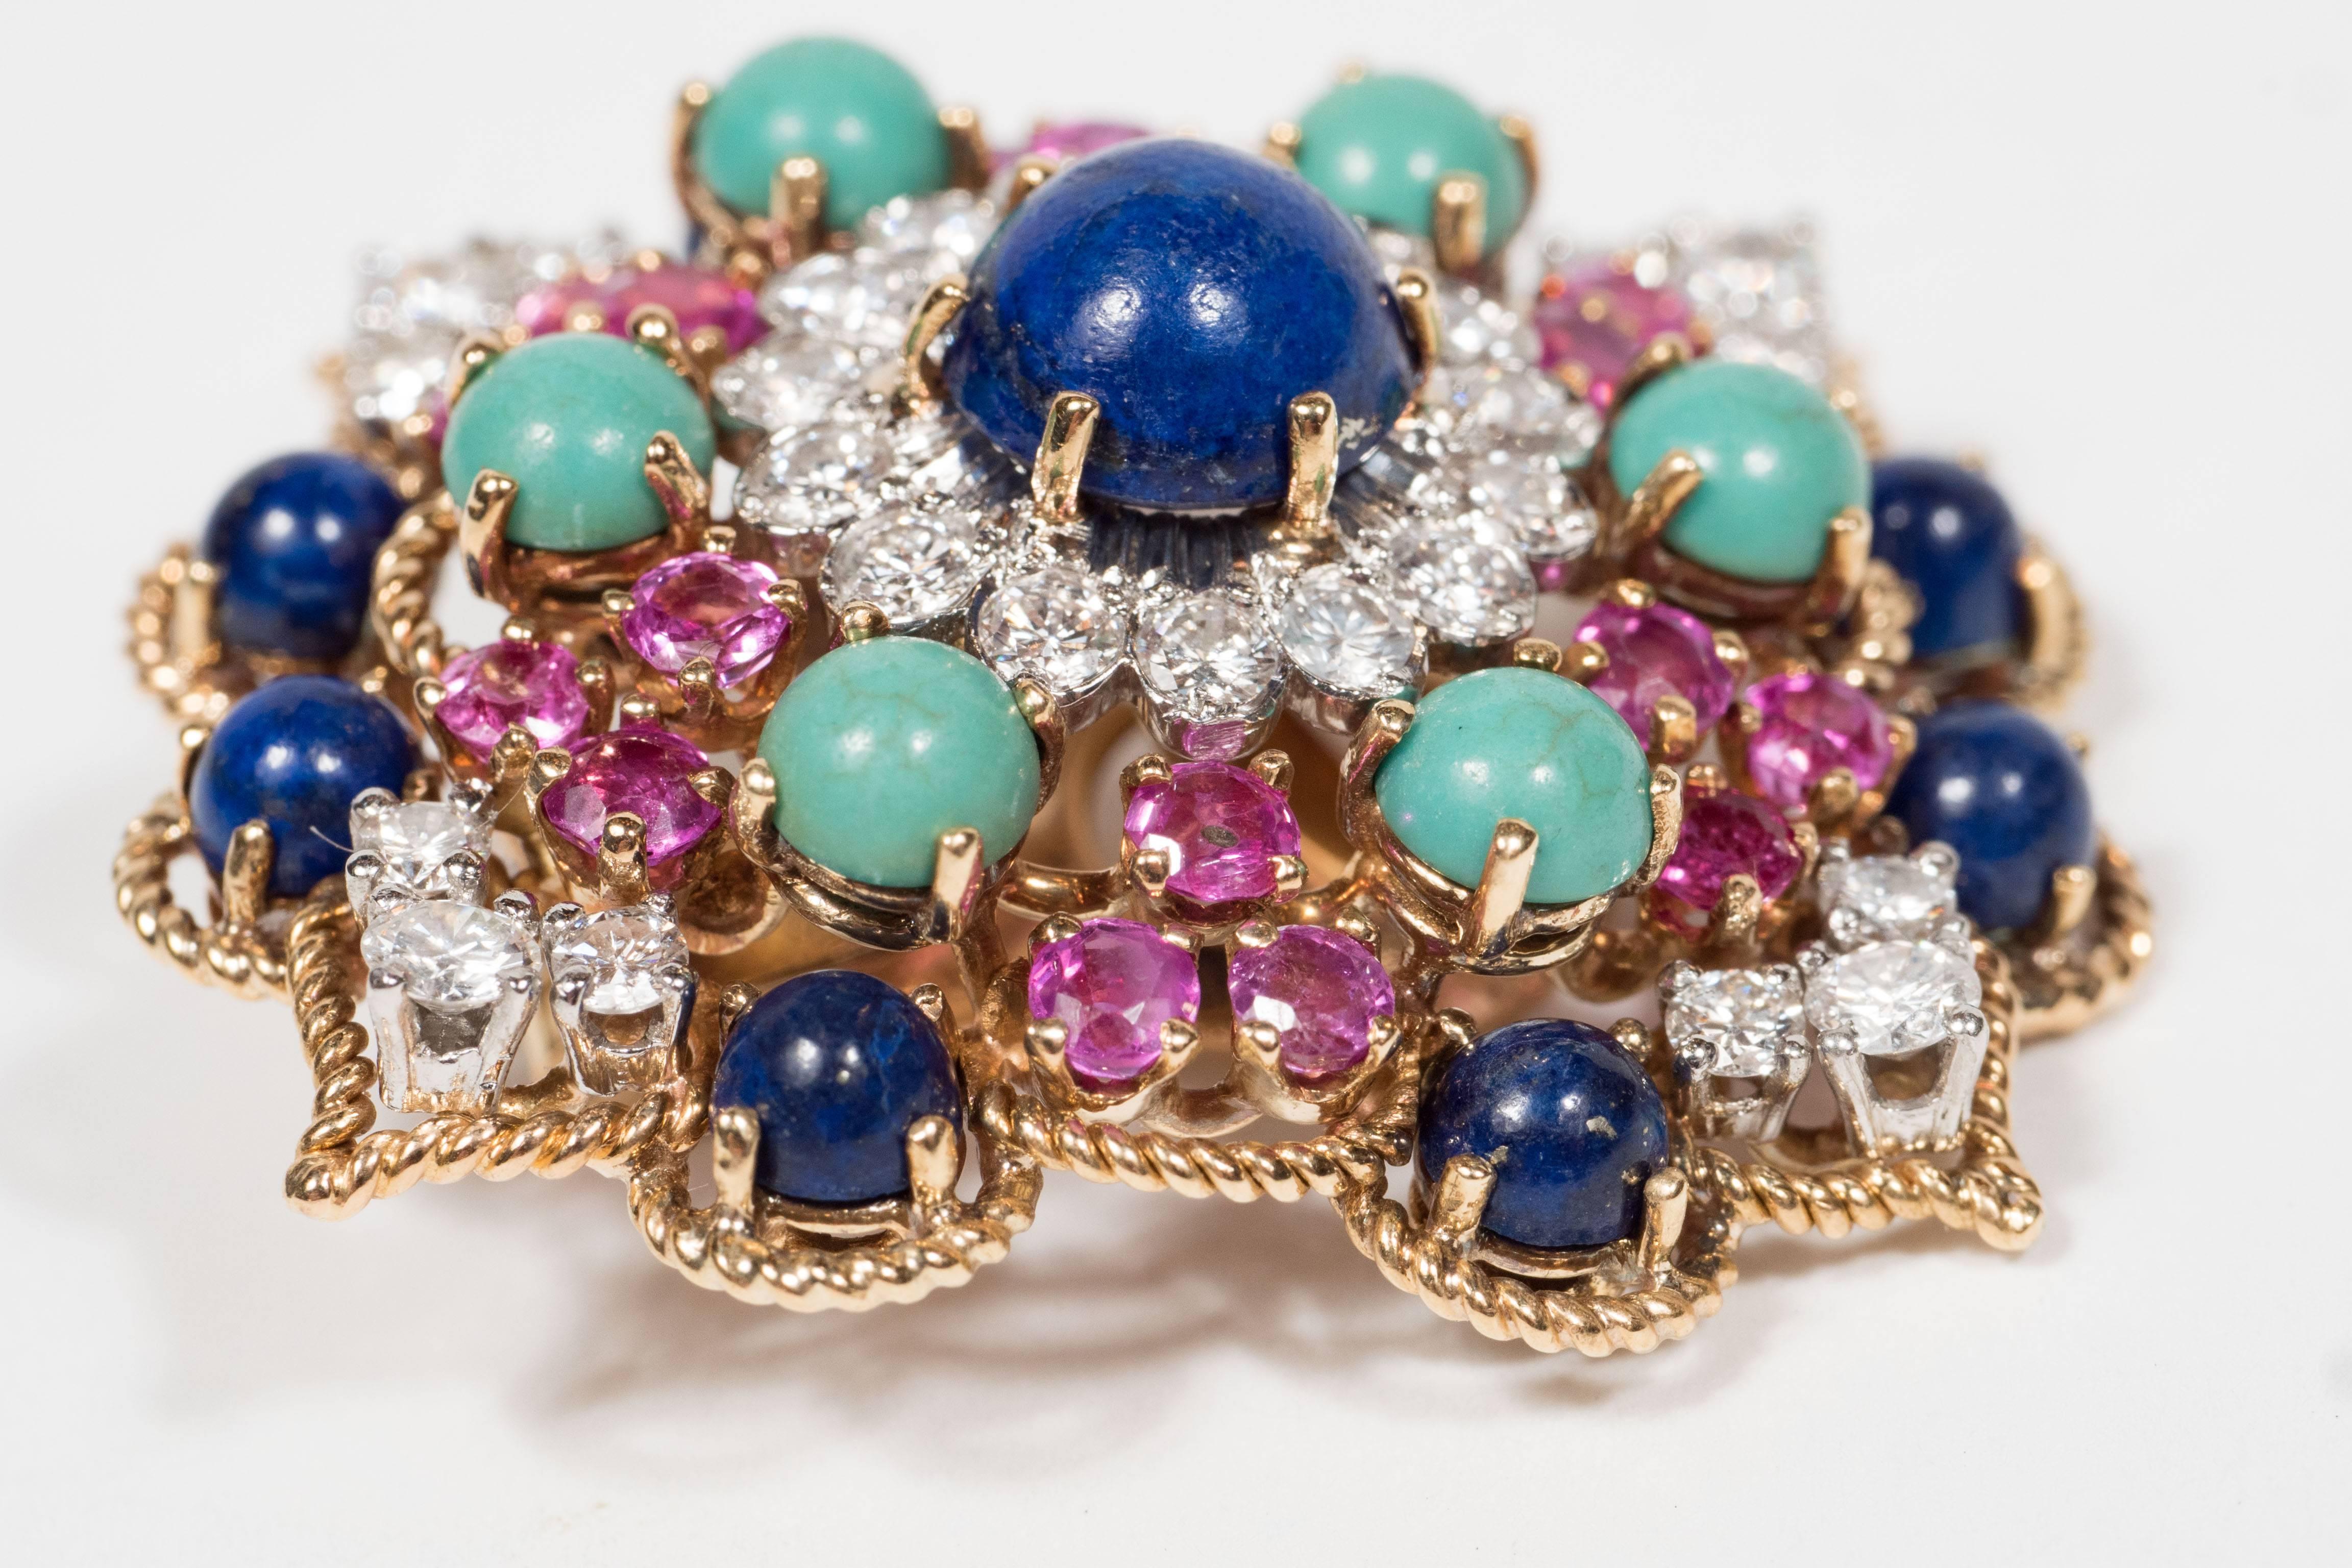 These mid-century modernist earclips are made in the United States by Marianne Oster. They are set in 18-karat yellow gold with platinum. These are set with numerous lapis lazuli and turquoise cabochons accented by numerous pink sapphires,